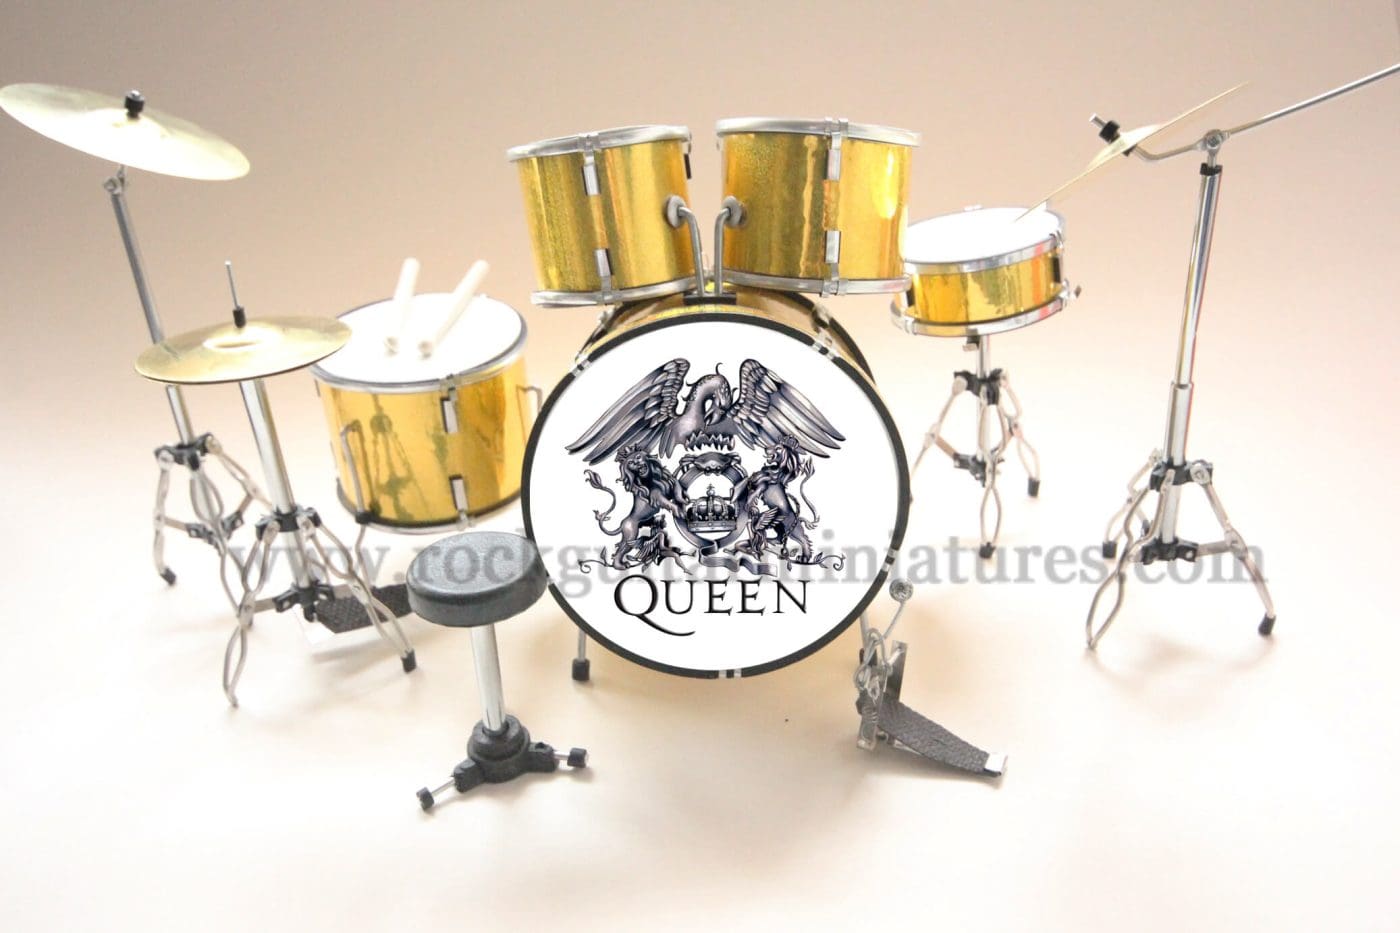 Queen Mini Drum Set Collectible Roger Taylor News of The World Robot Replica Kit